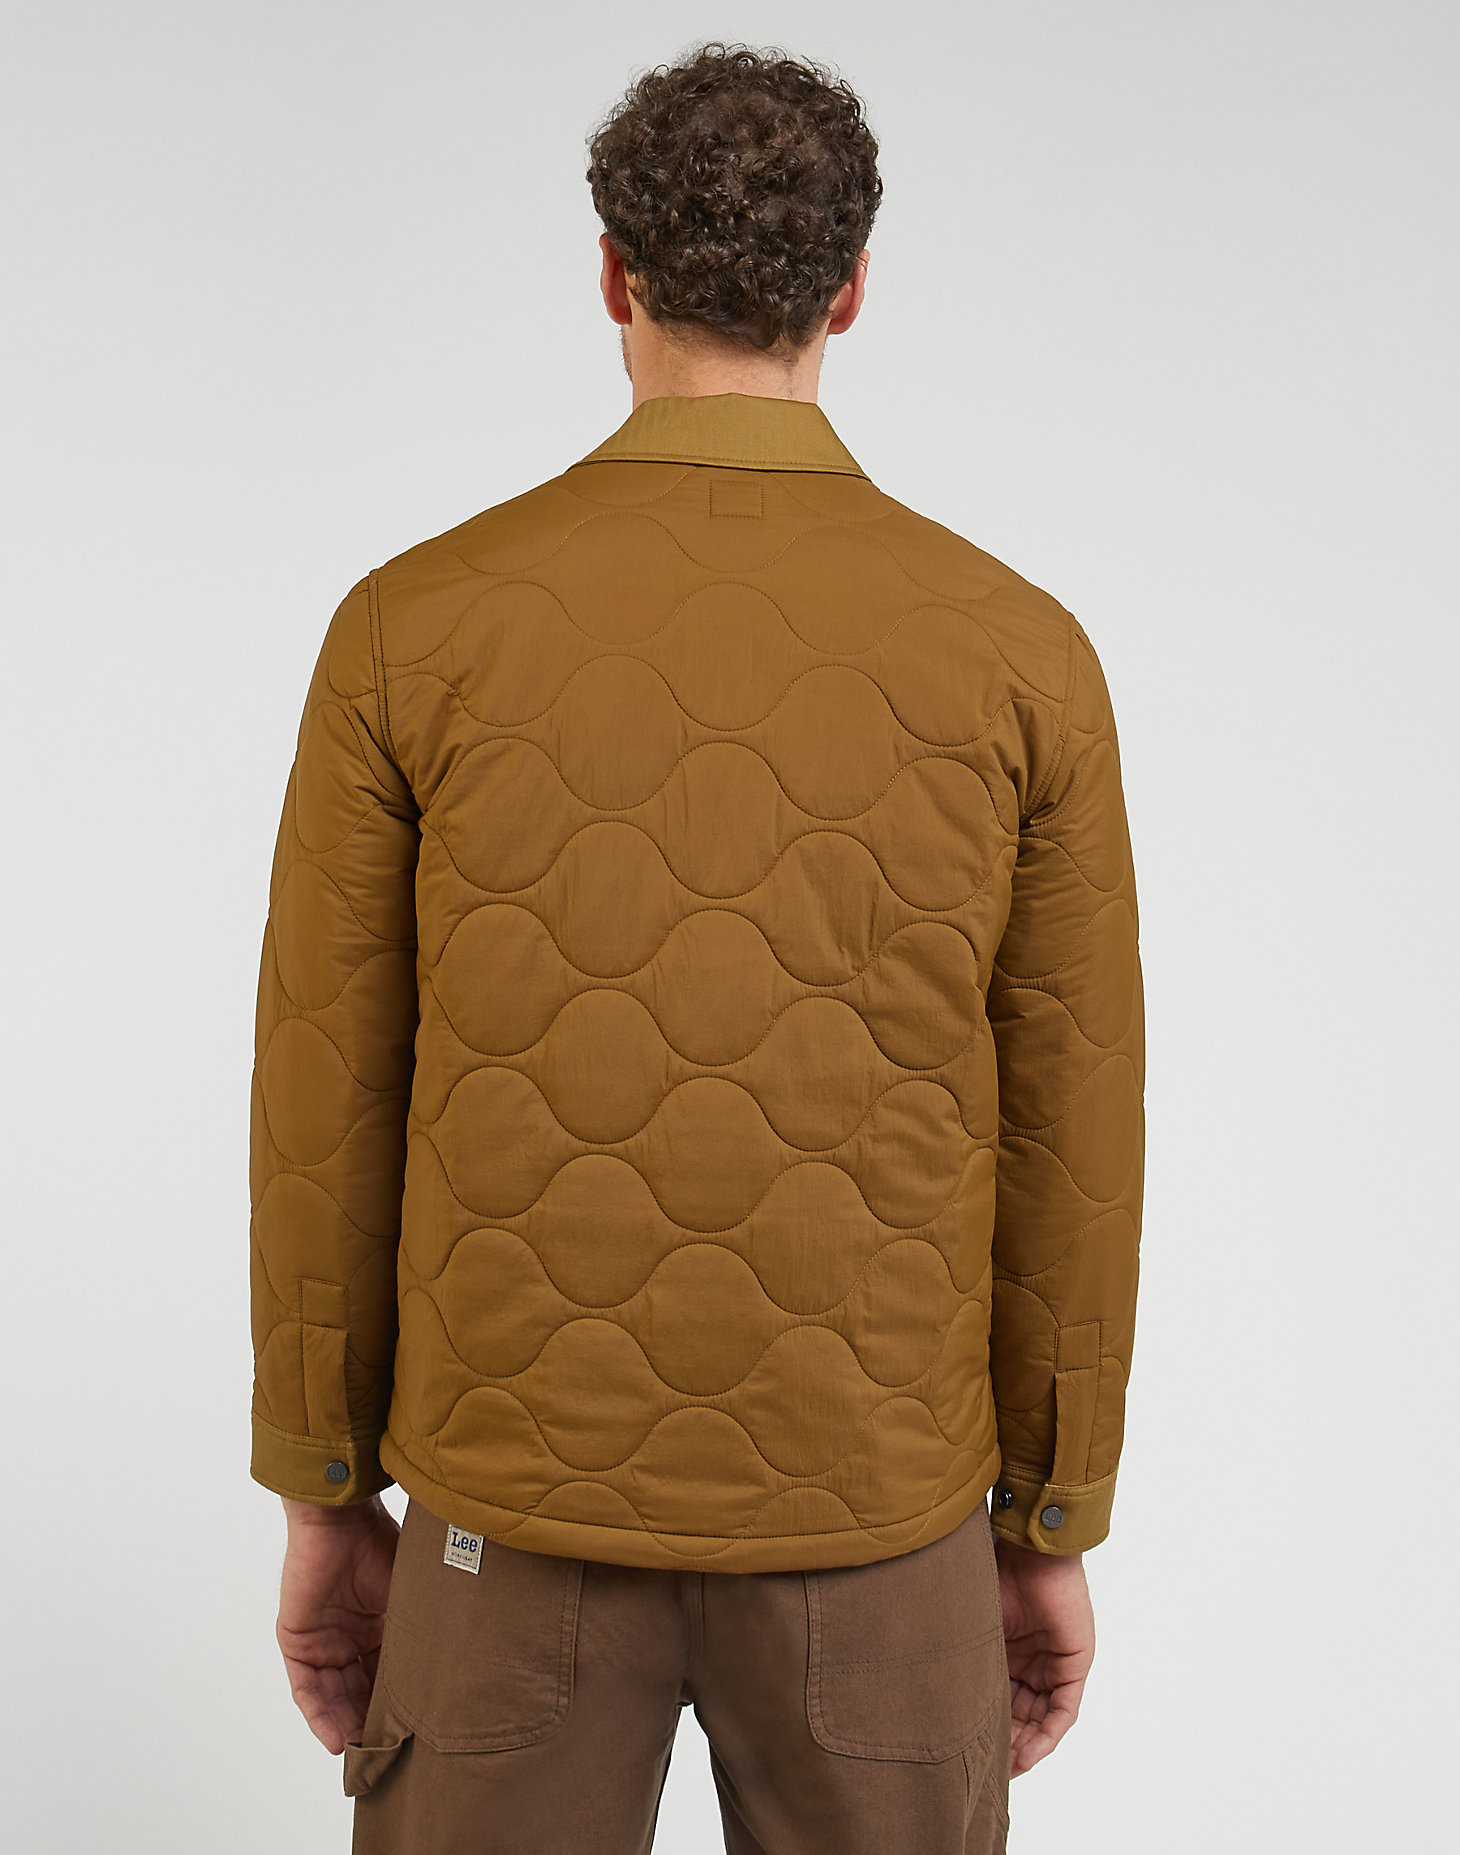 Quilted Overshirt in Tumbleweed alternative view 1